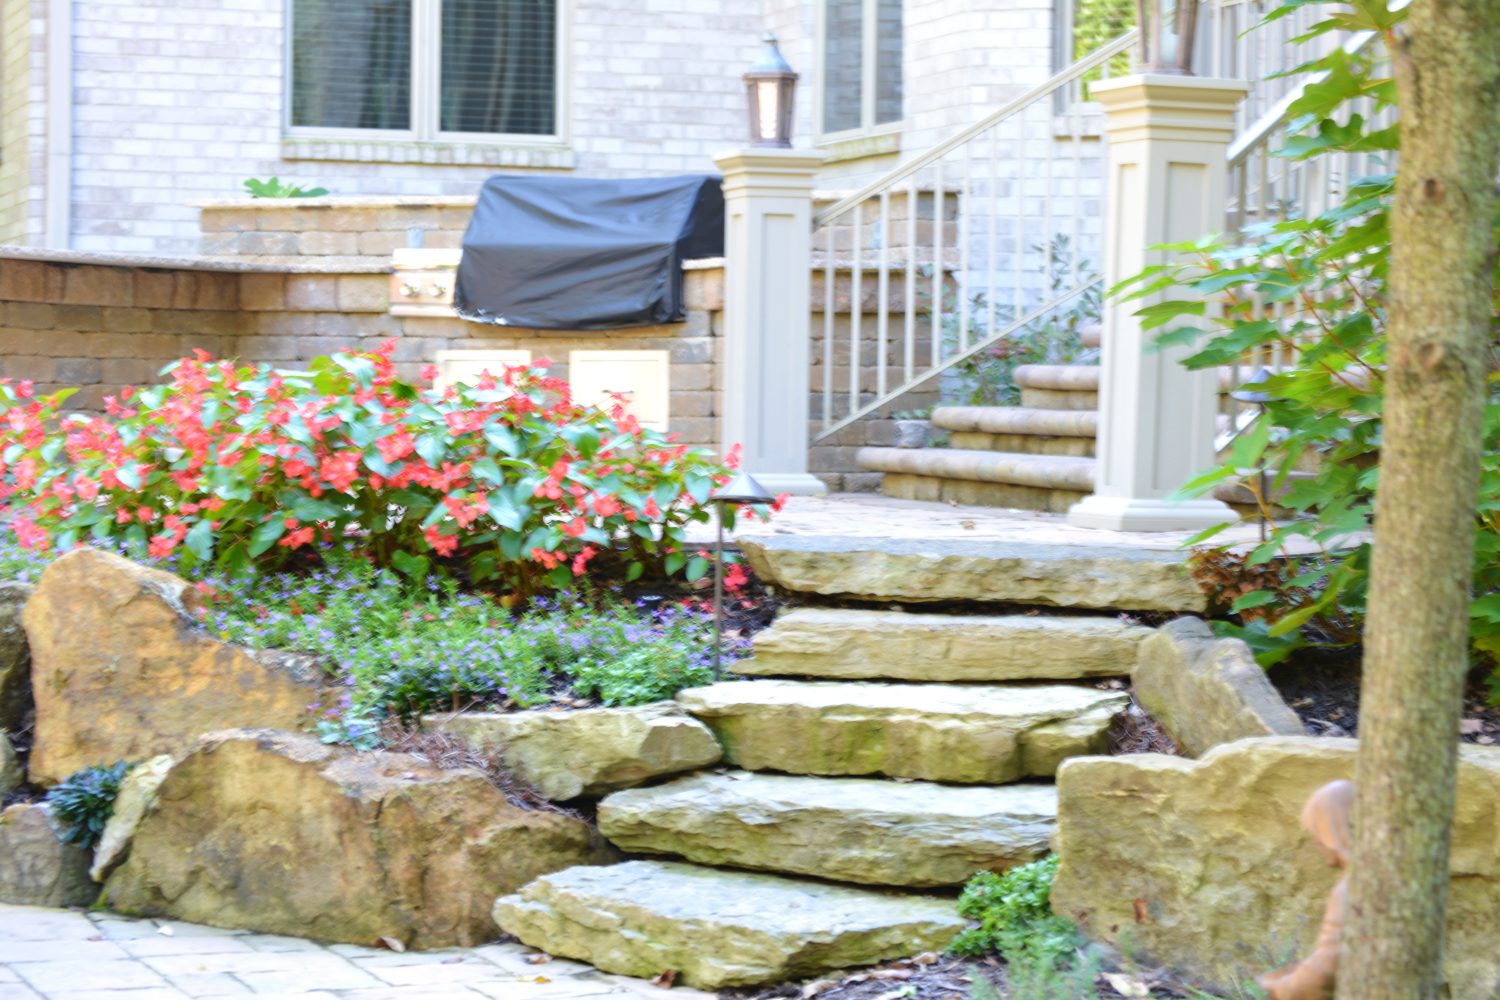 Hardscape steps surrounded by annual flowers